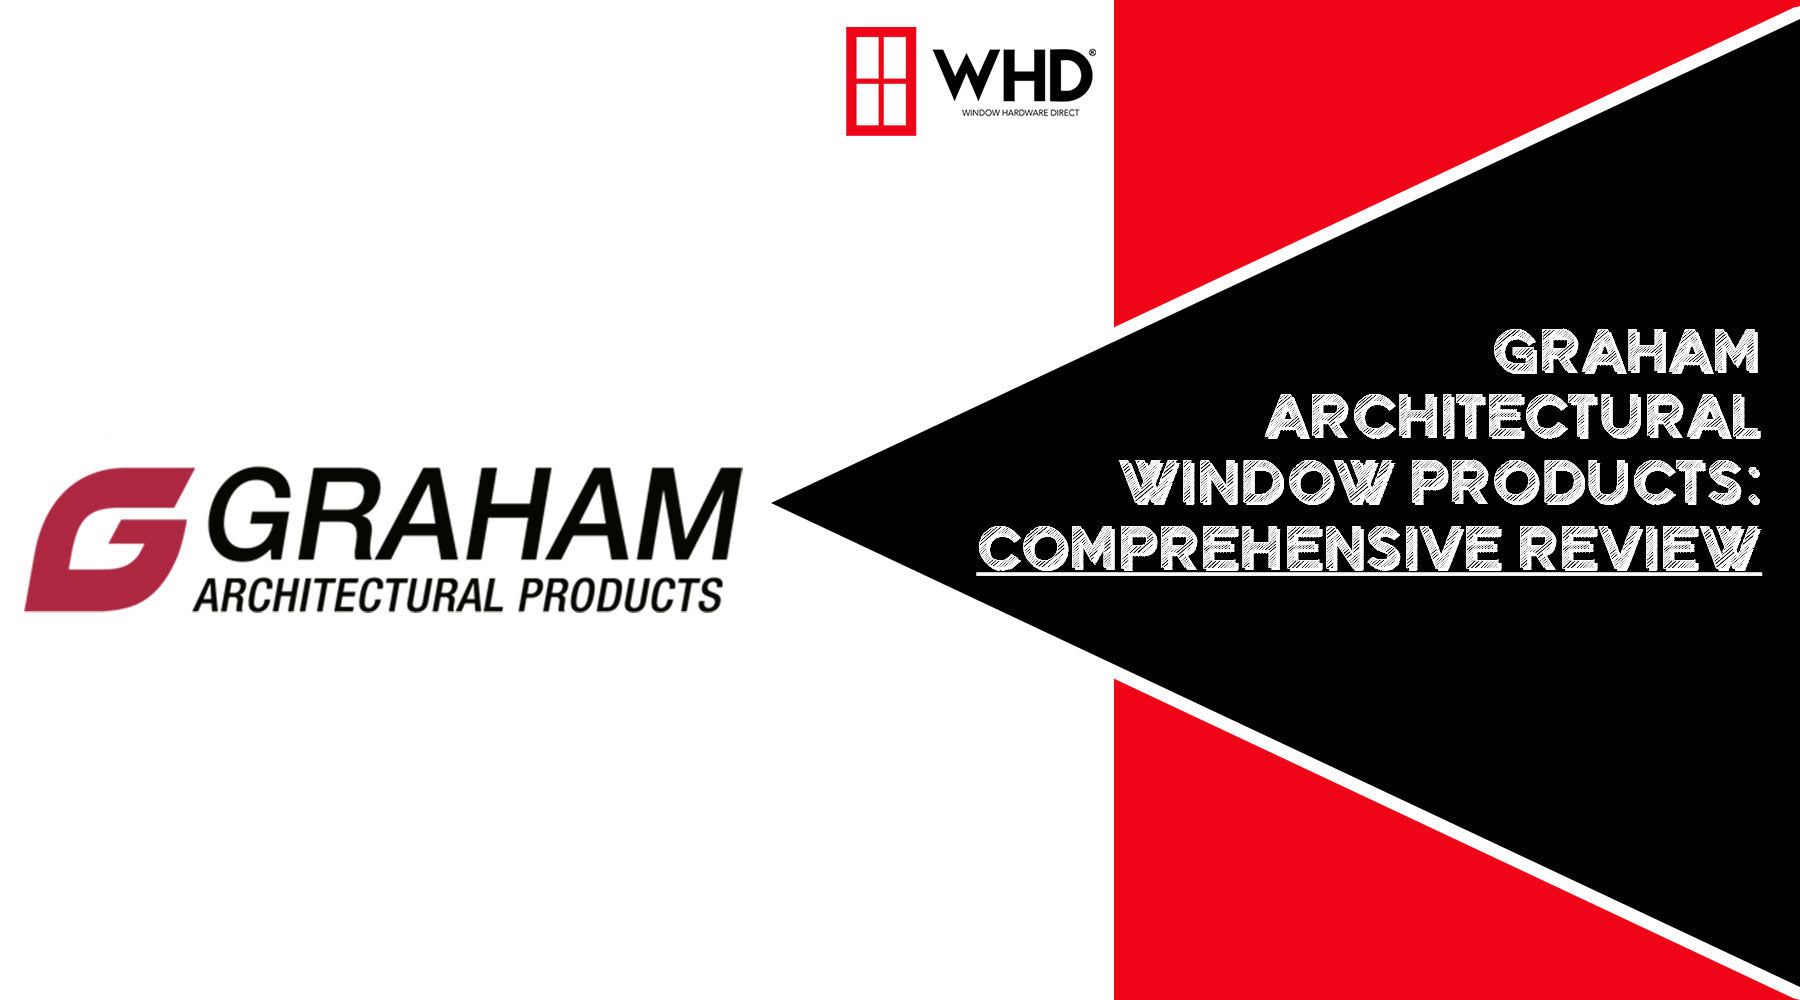 Graham Architectural Window Products: A Comprehensive Review